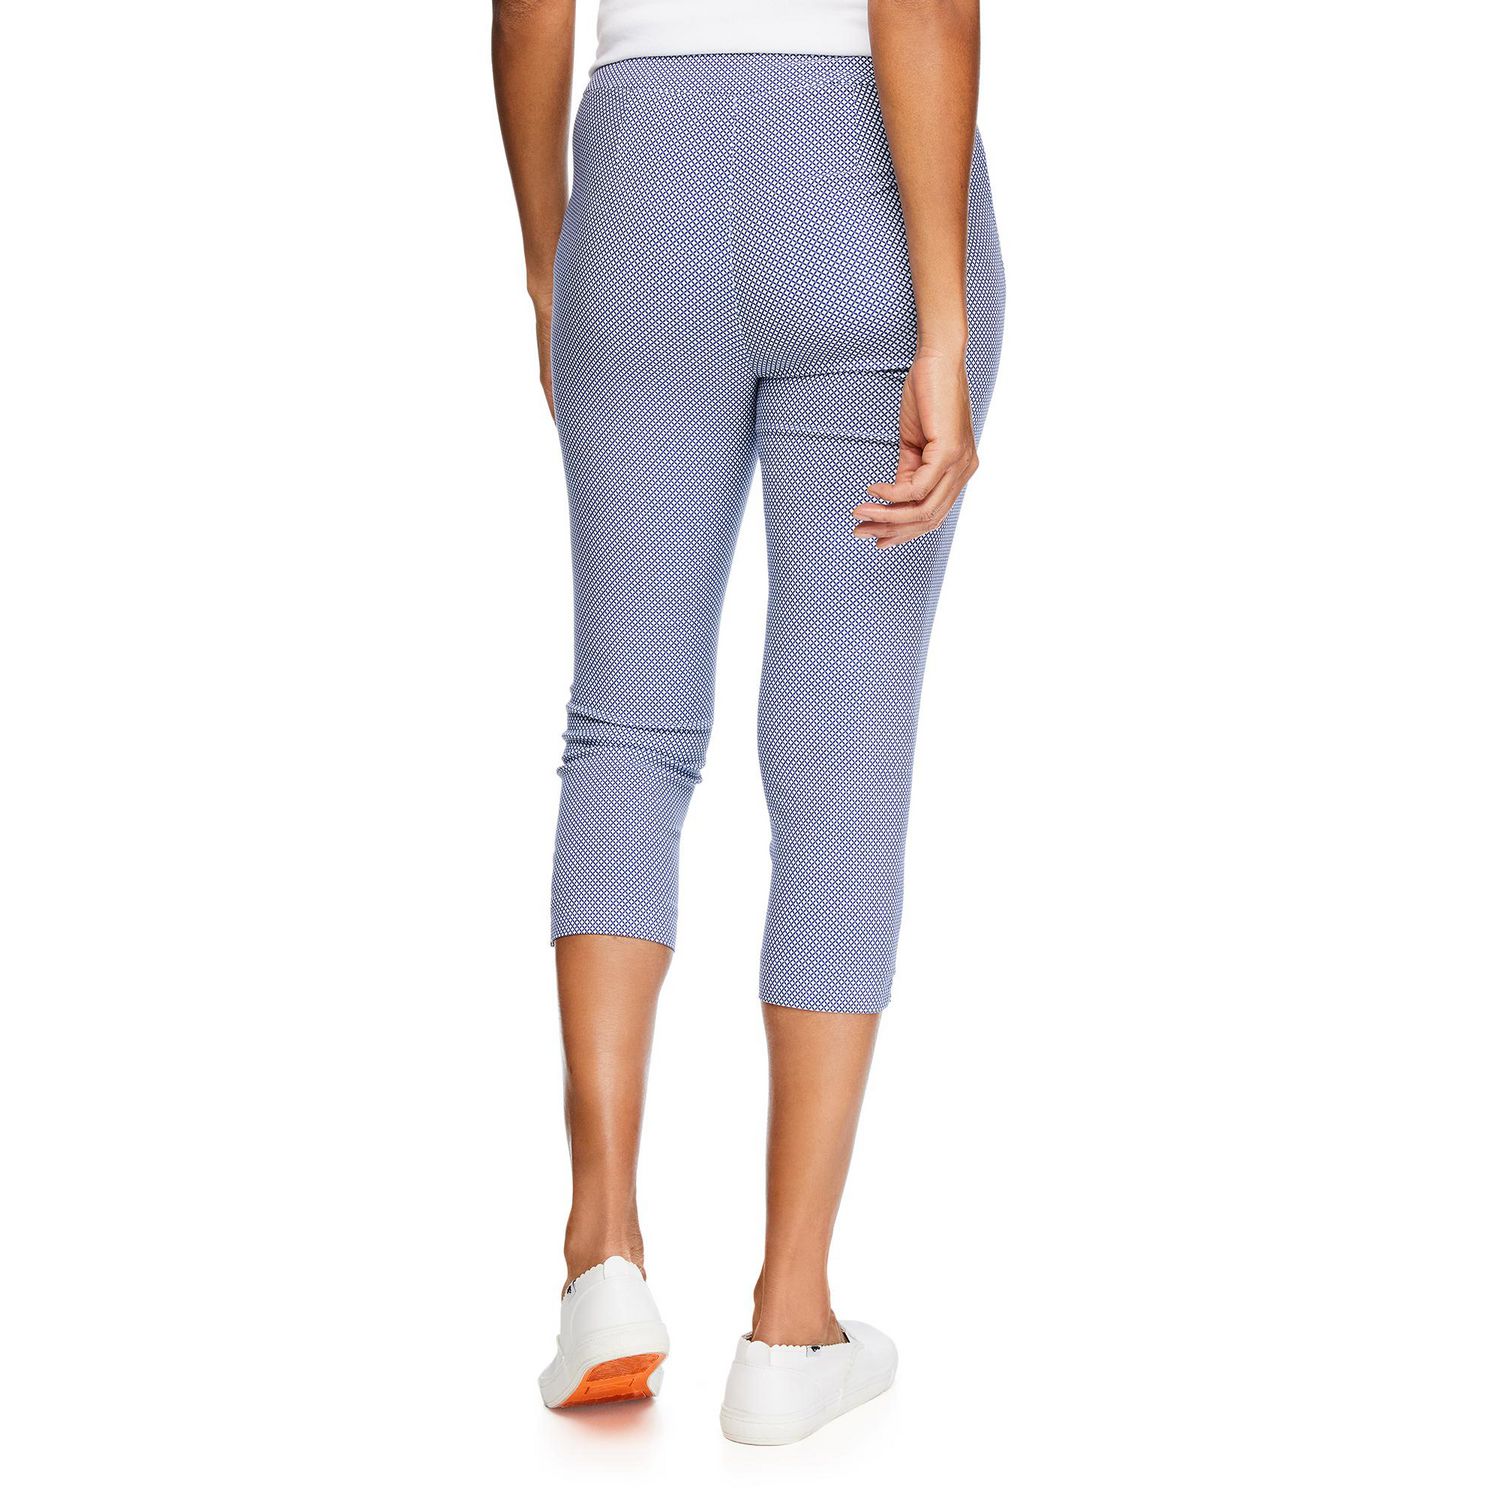 c-guard® Female's sky blue french jogger scrub suit_ xs Pant, Shirt  Hospital Scrub Price in India - Buy c-guard® Female's sky blue french jogger  scrub suit_ xs Pant, Shirt Hospital Scrub online